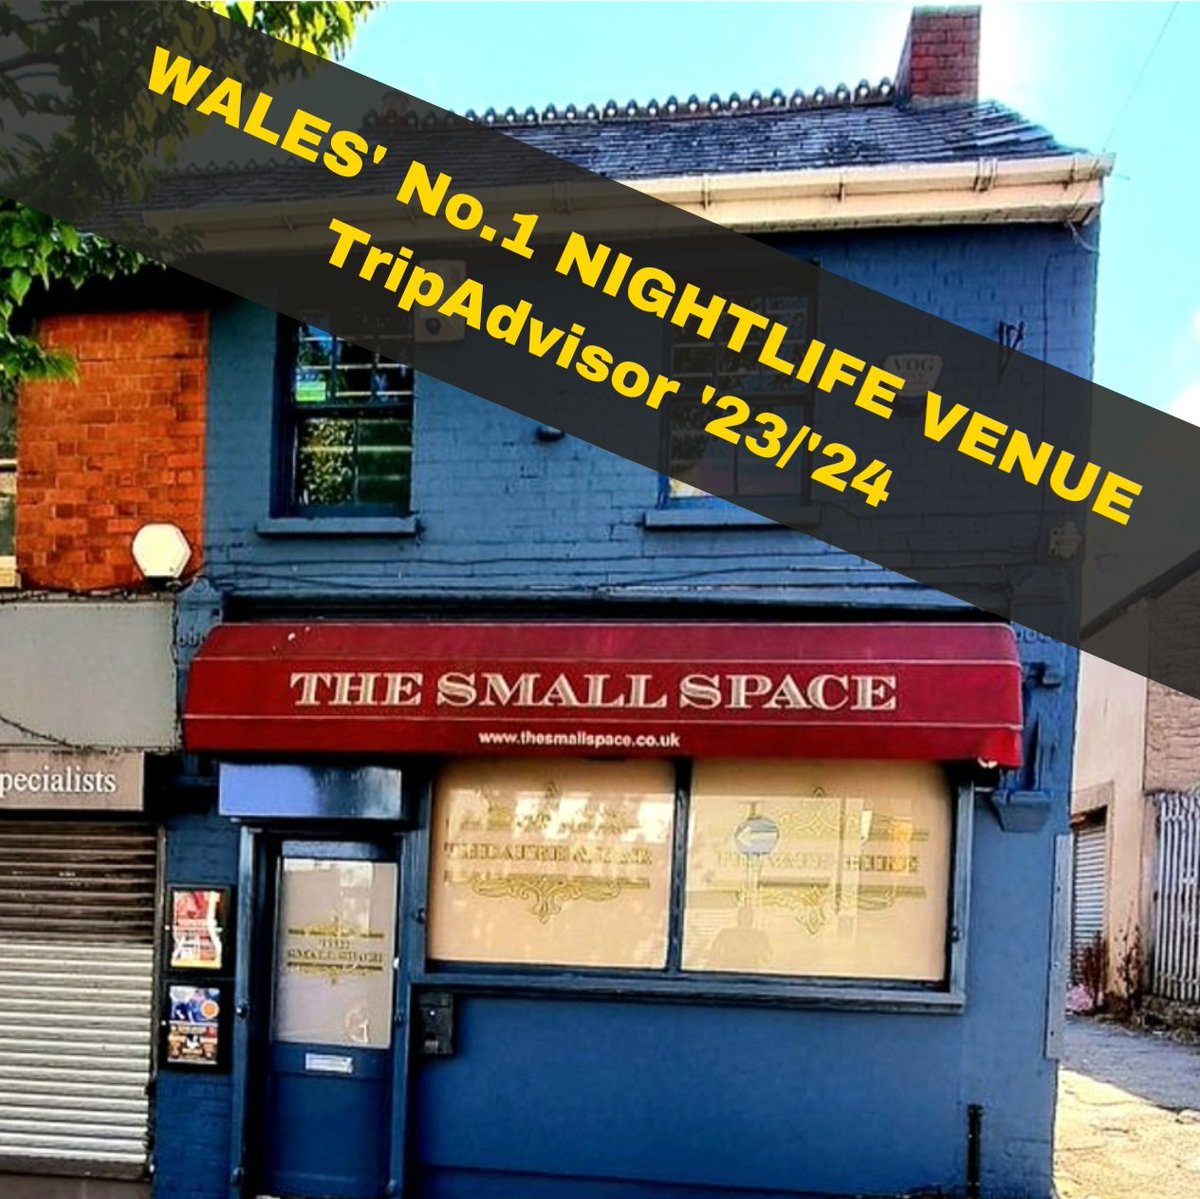 Visited Wales' Officially No.1 Rated Nightlife Venue at 5 Island Rd, Barry? magic shows for adults, live music & comedy plus private party hire Book thesmallspace.co.uk/whats-on #theatre #magic #comedy #liveentertainment #Barry #cardiff #whatsoncardiff #supportlocal #livemusic